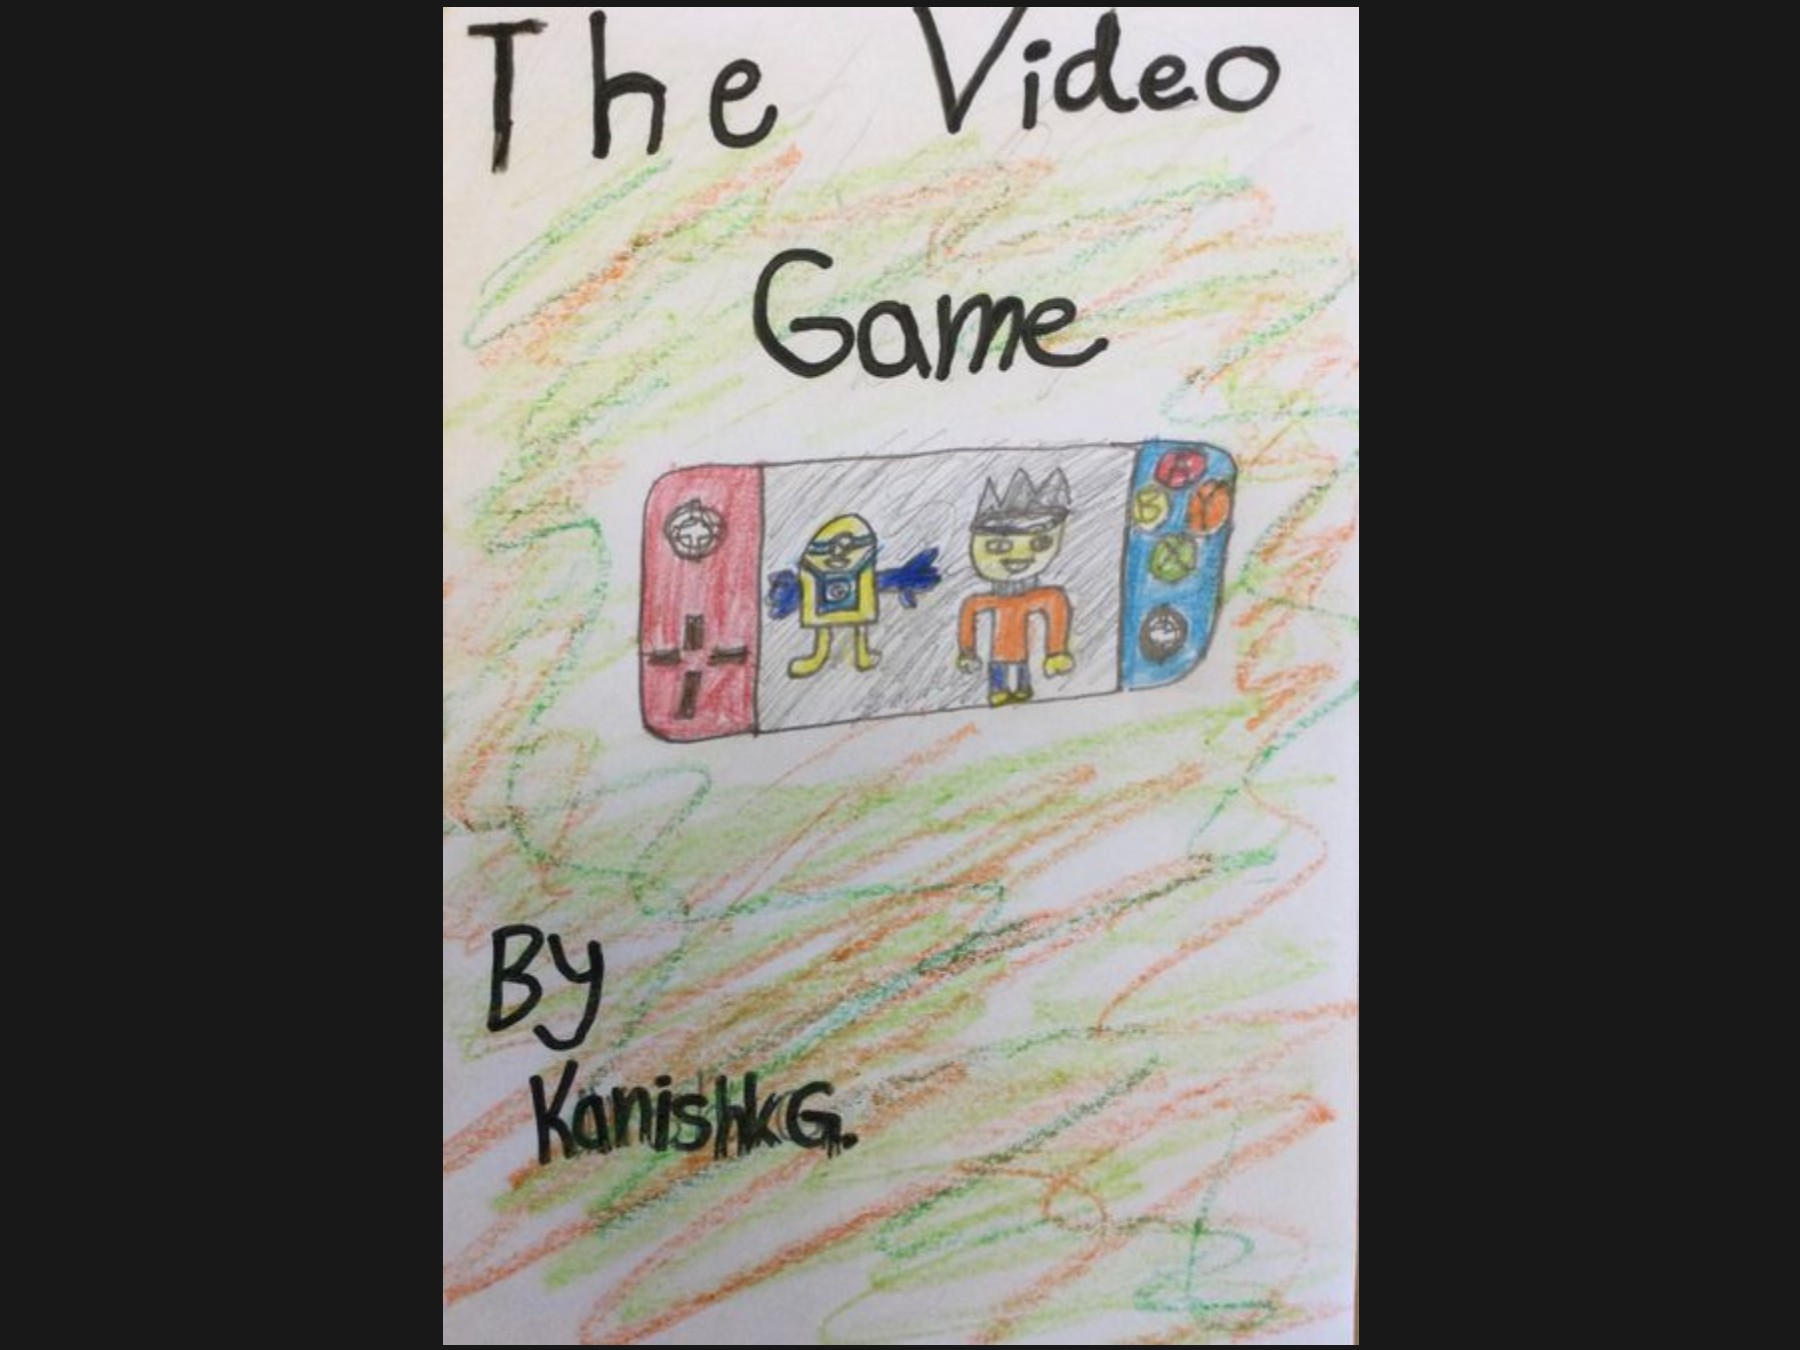 The Video Game by Kanishk G